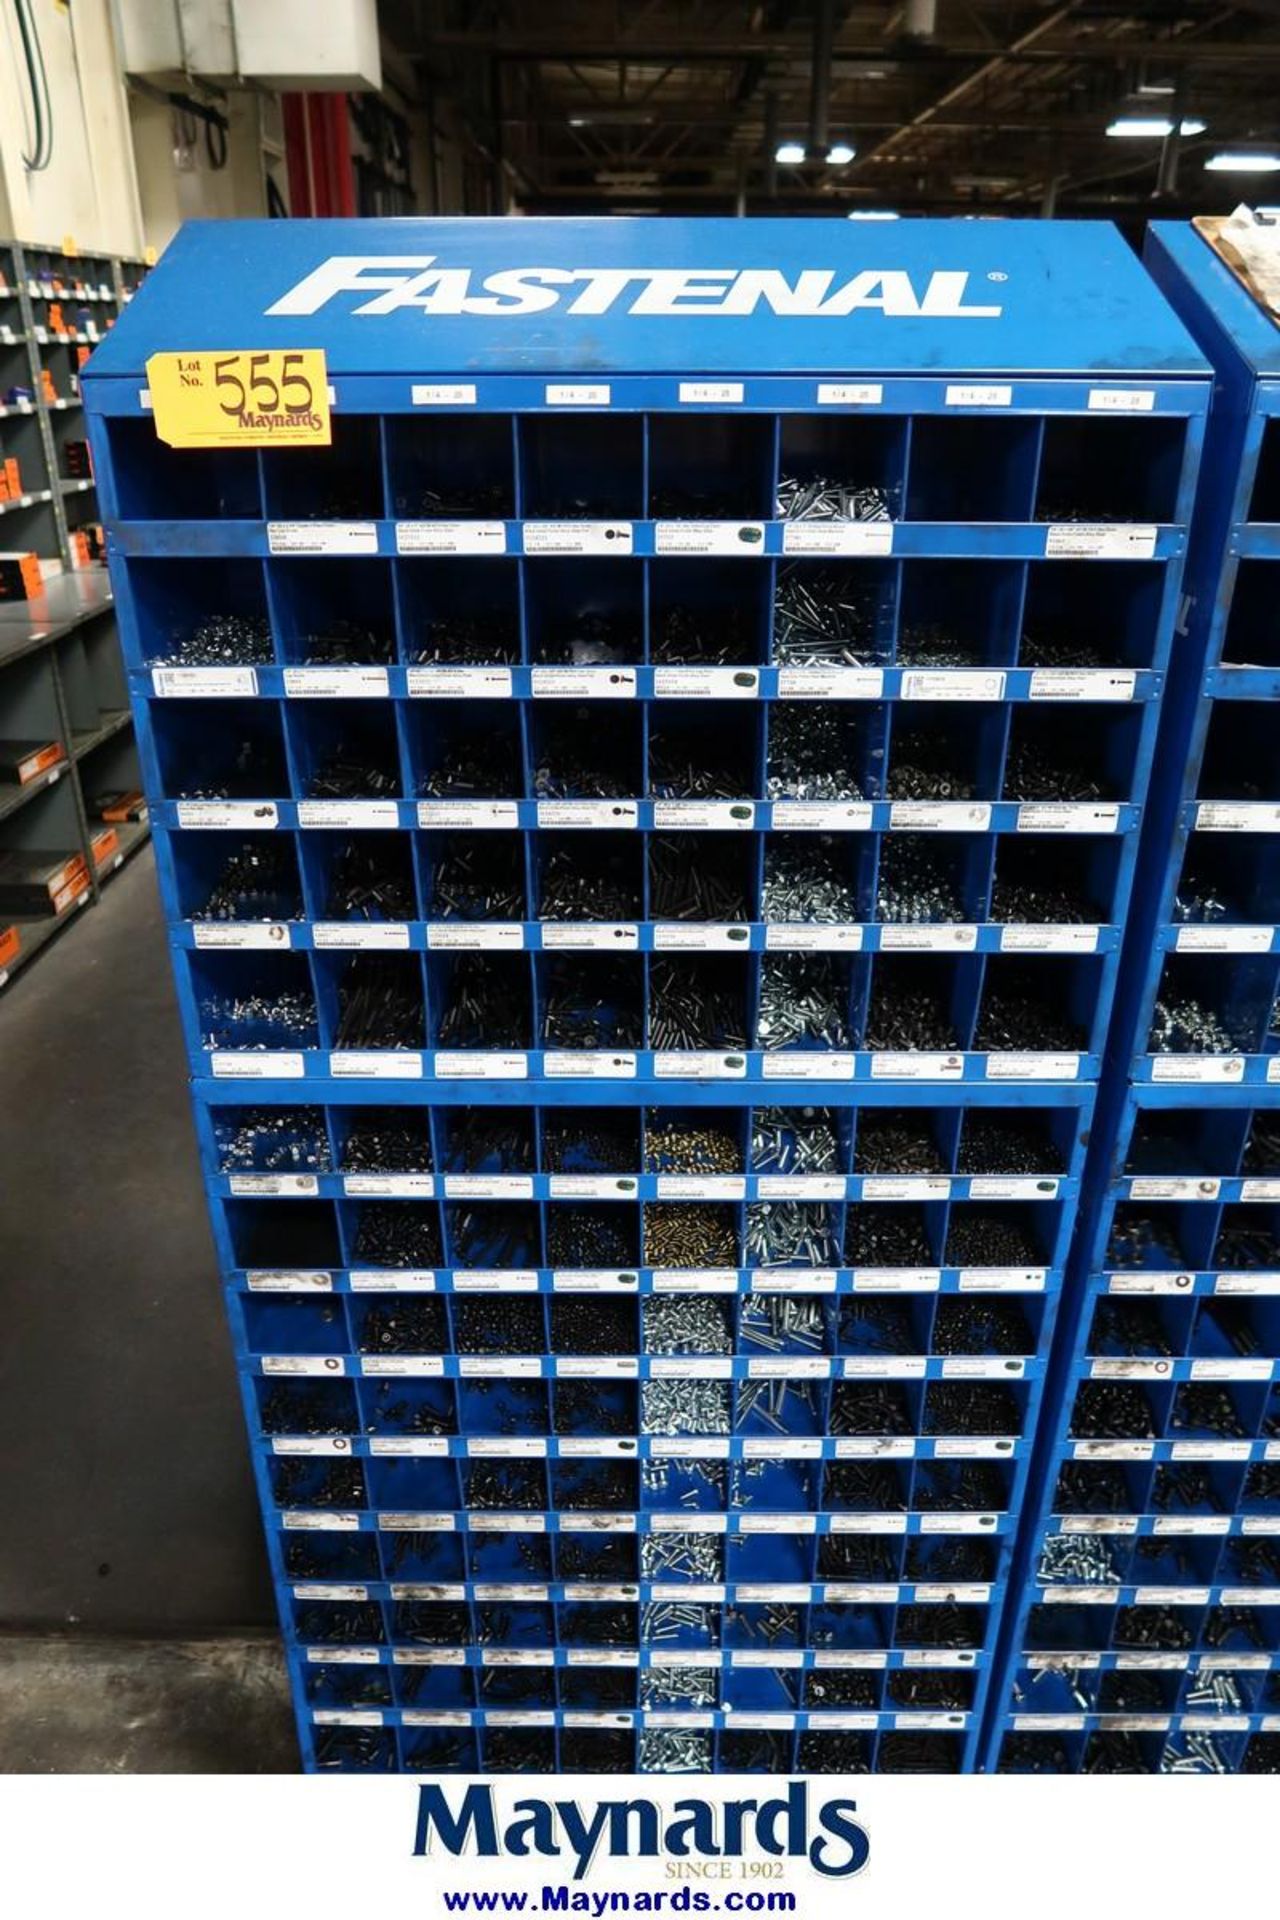 Fastenal 112-Compartment Bolt Bins - Image 3 of 3